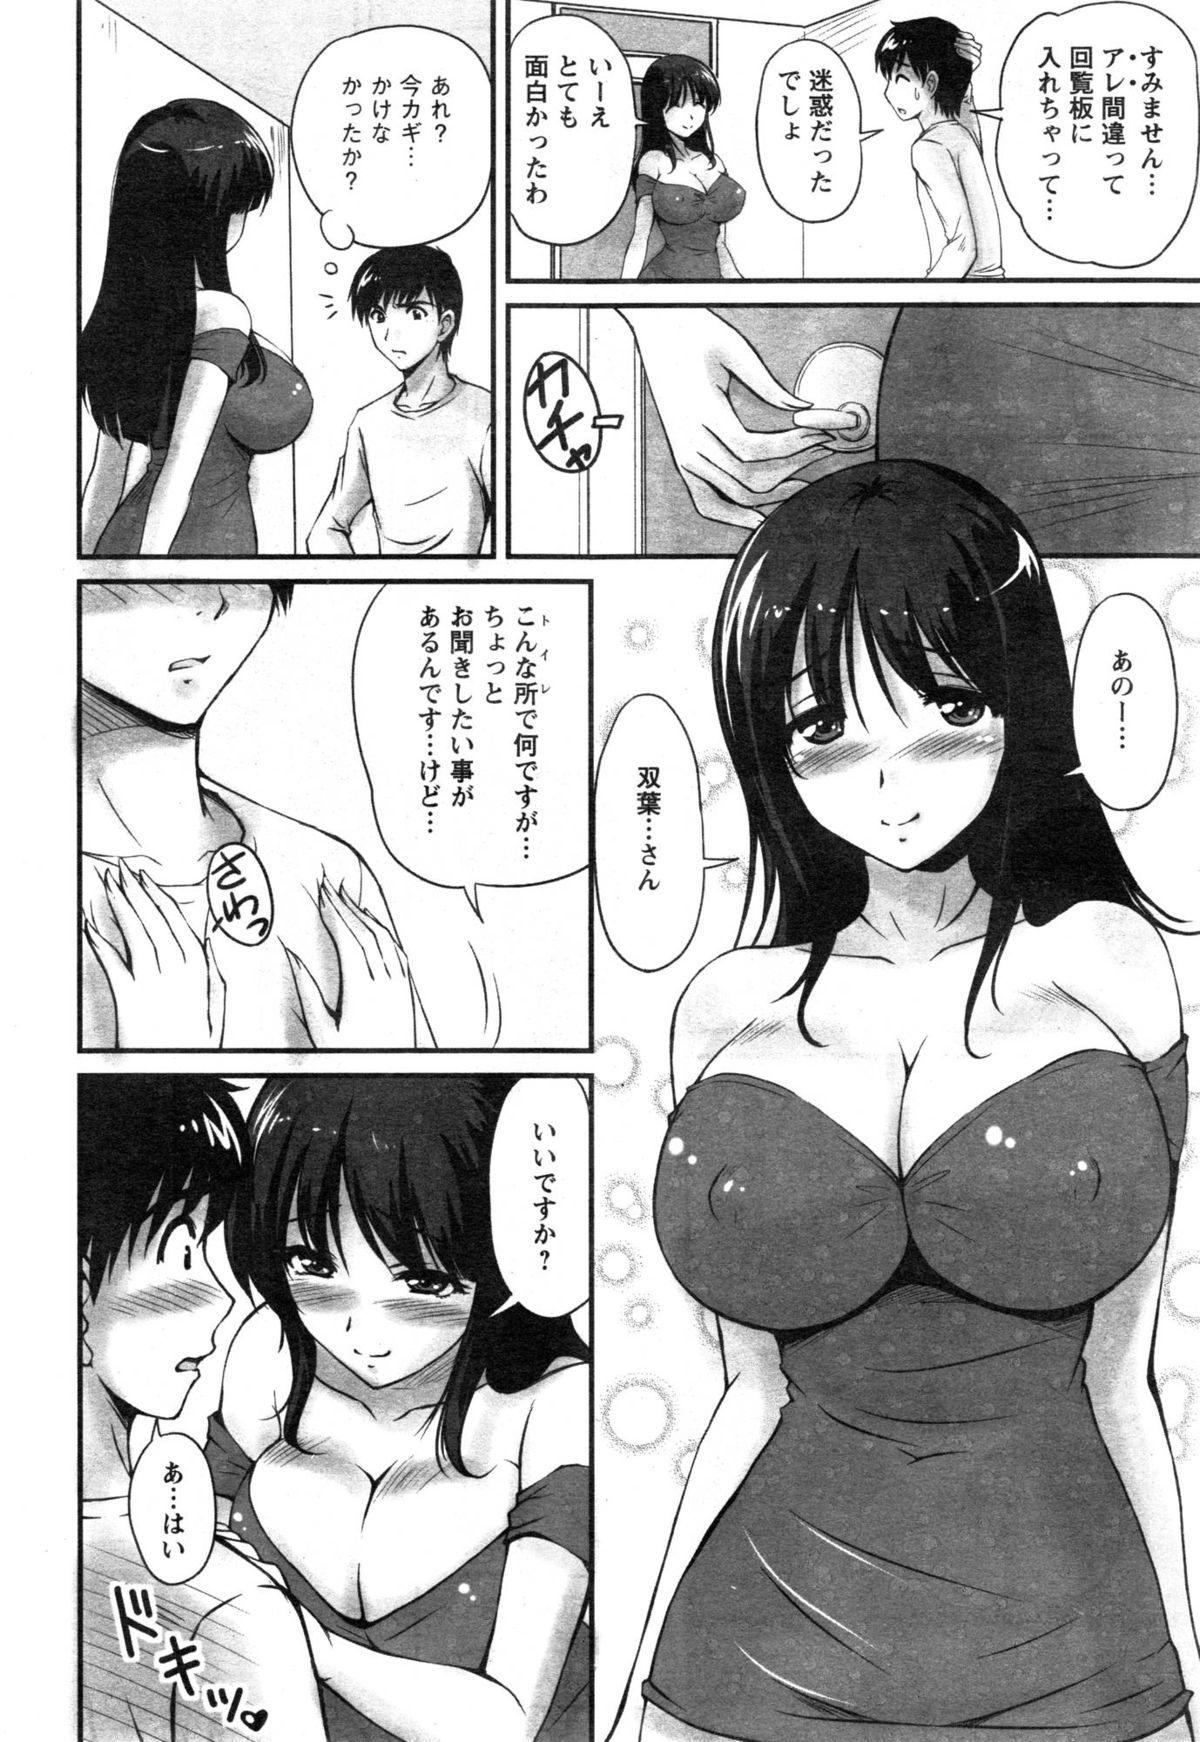 Action Pizazz Special 2015-01 page 34 full